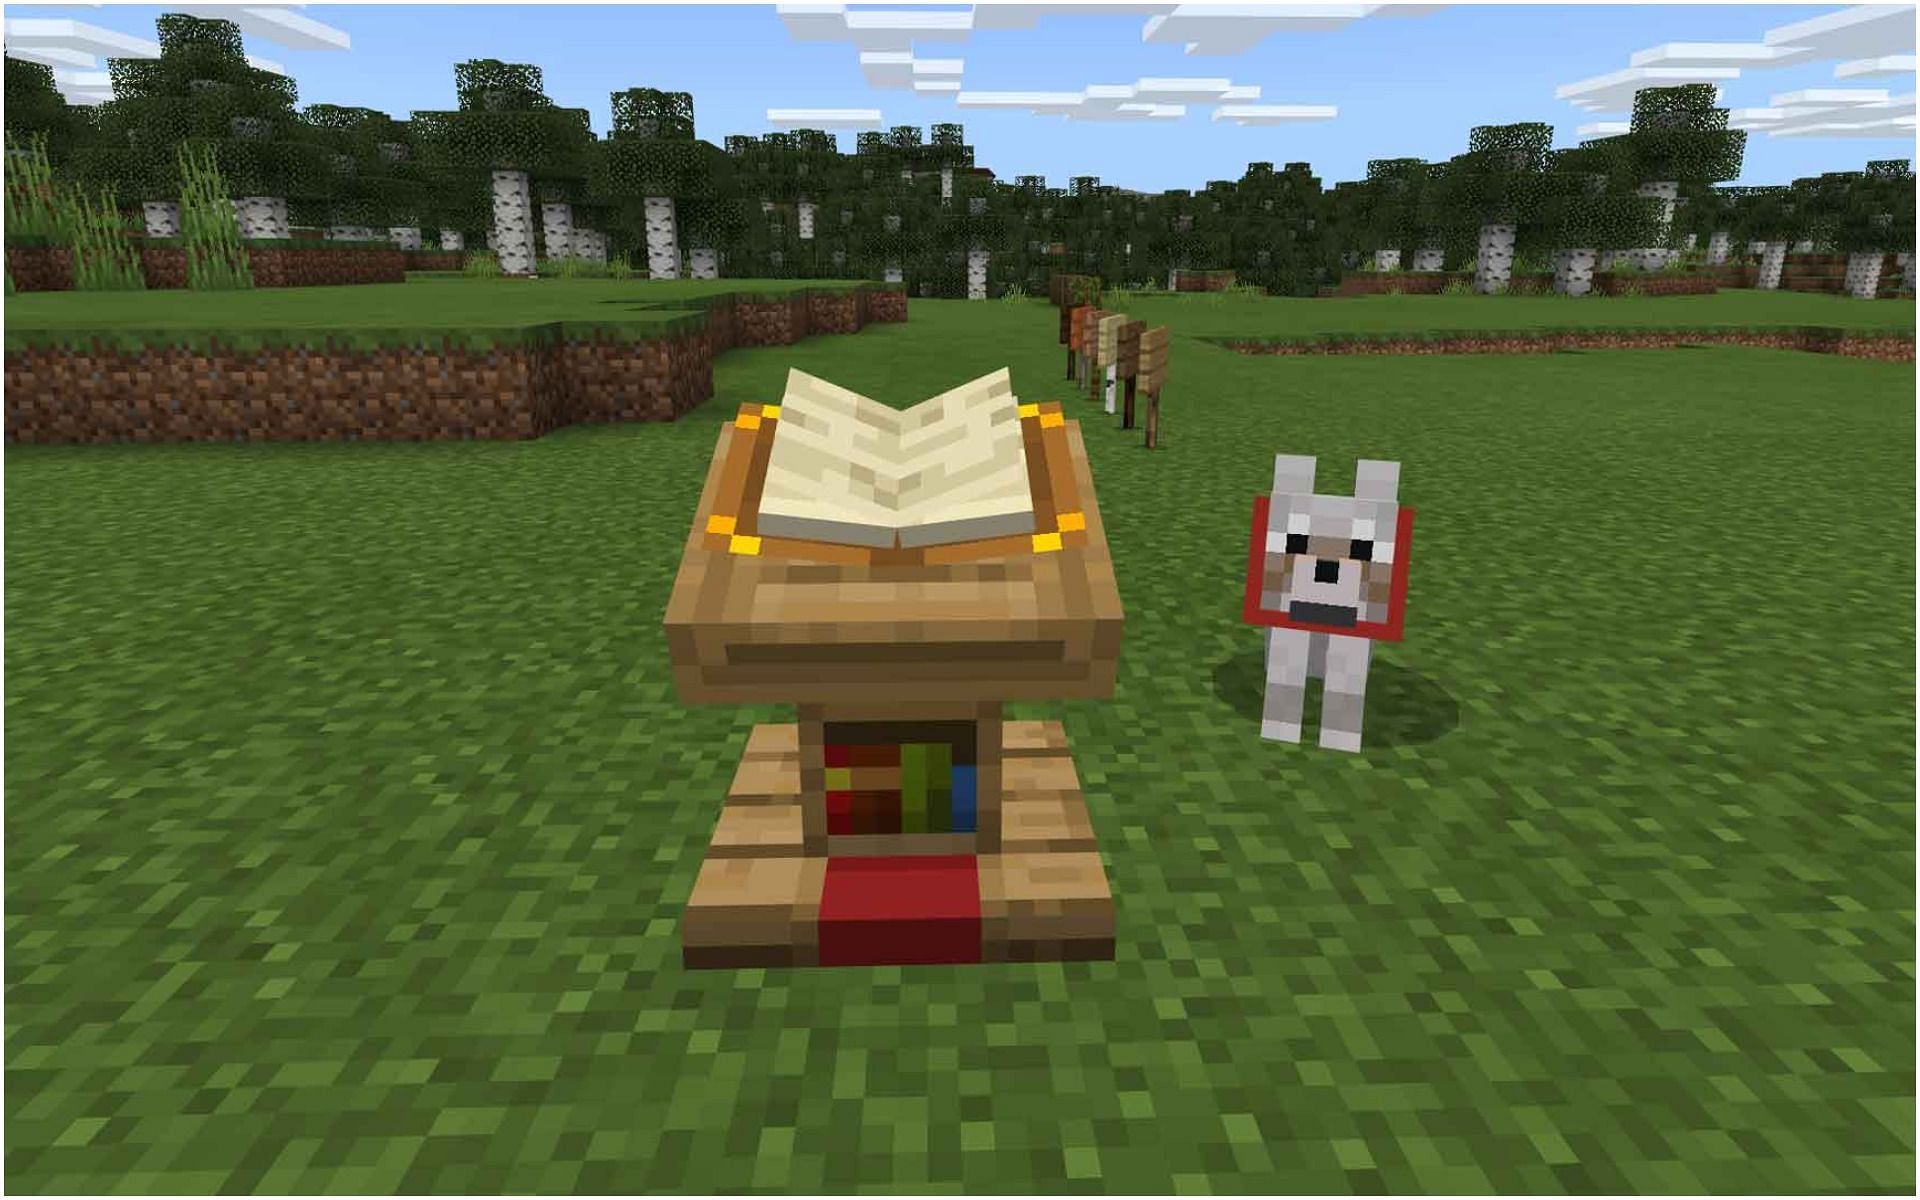 A Lectern in Minecraft (Image via Minecraft)